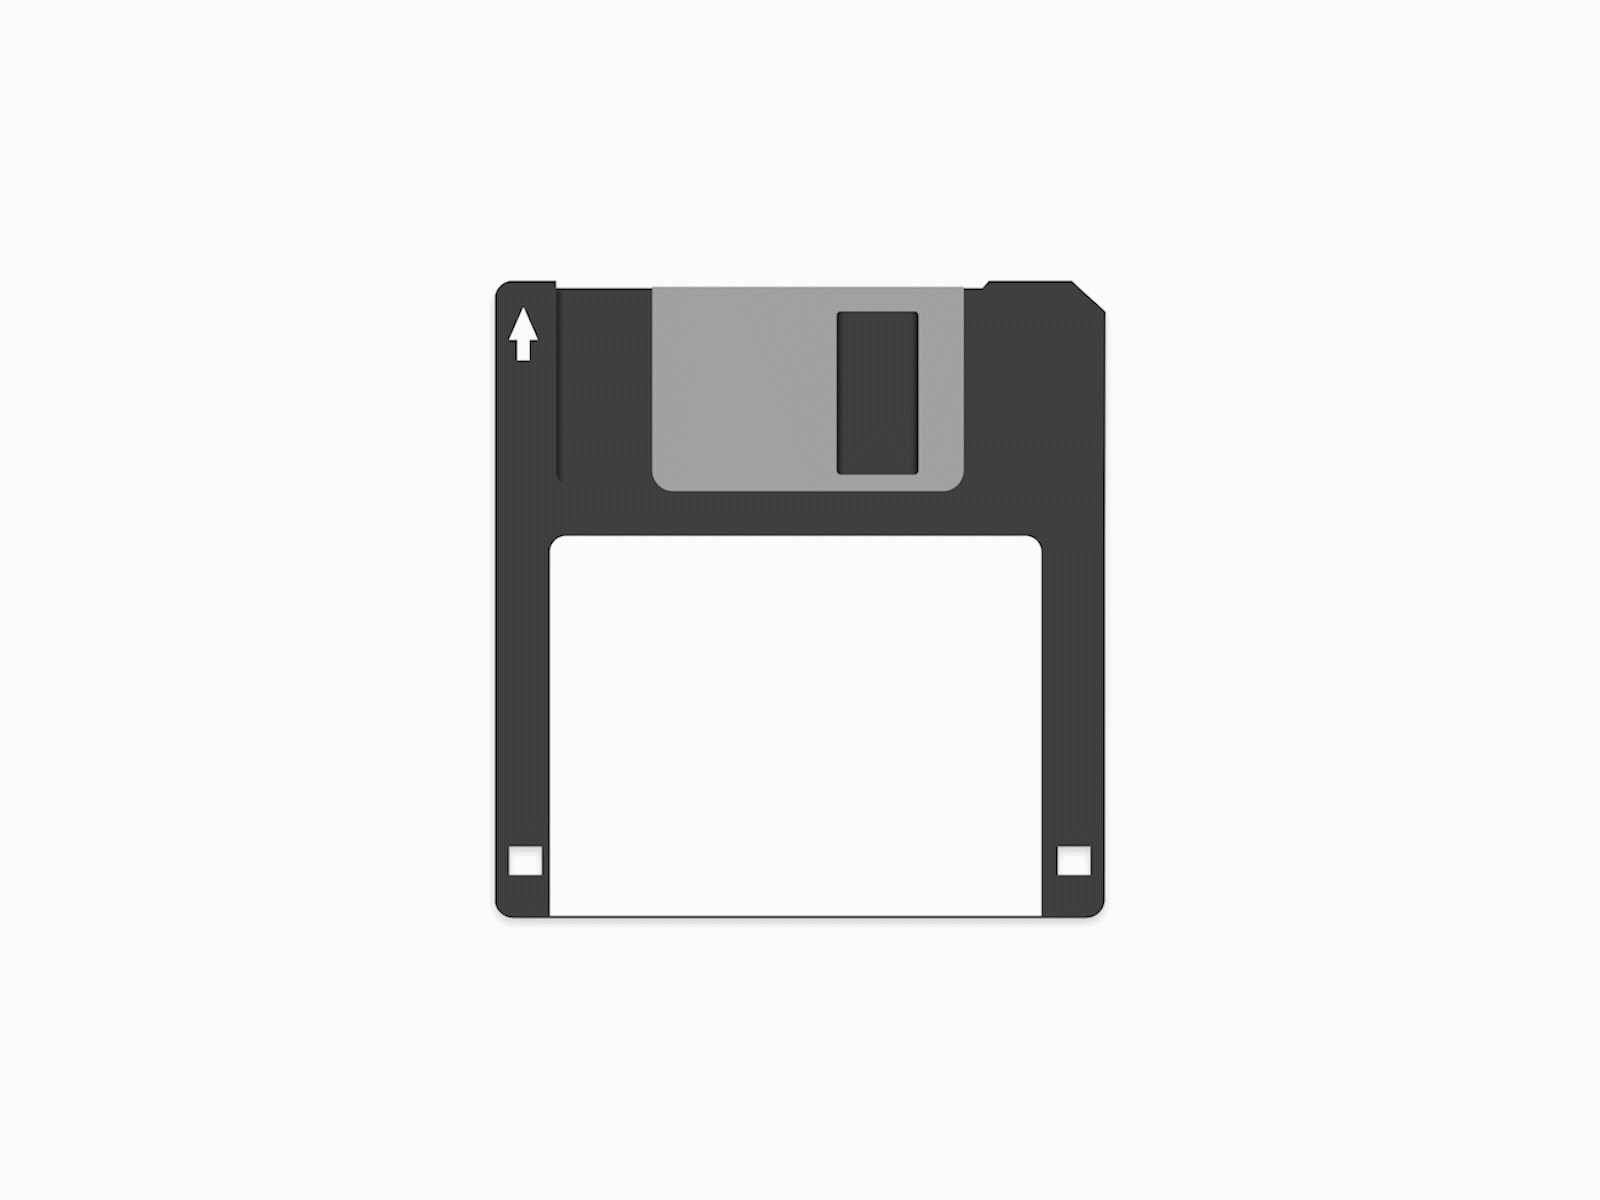 Floppy Save Button by Thor Schroeder on Dribbble